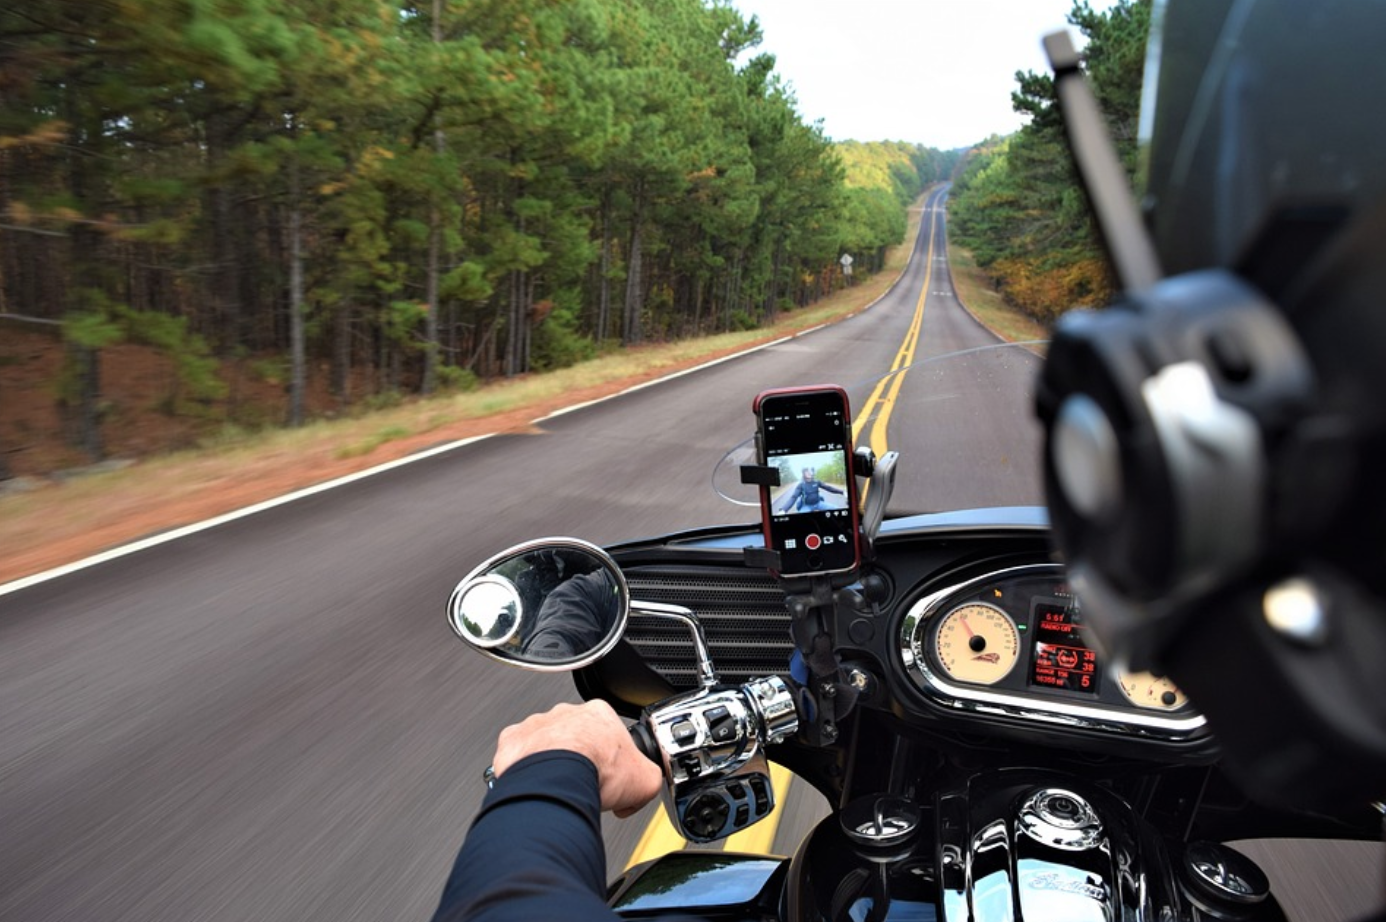 Point of view shot of a motorcycle road trip; image by Cloney, via Pixabay.com.